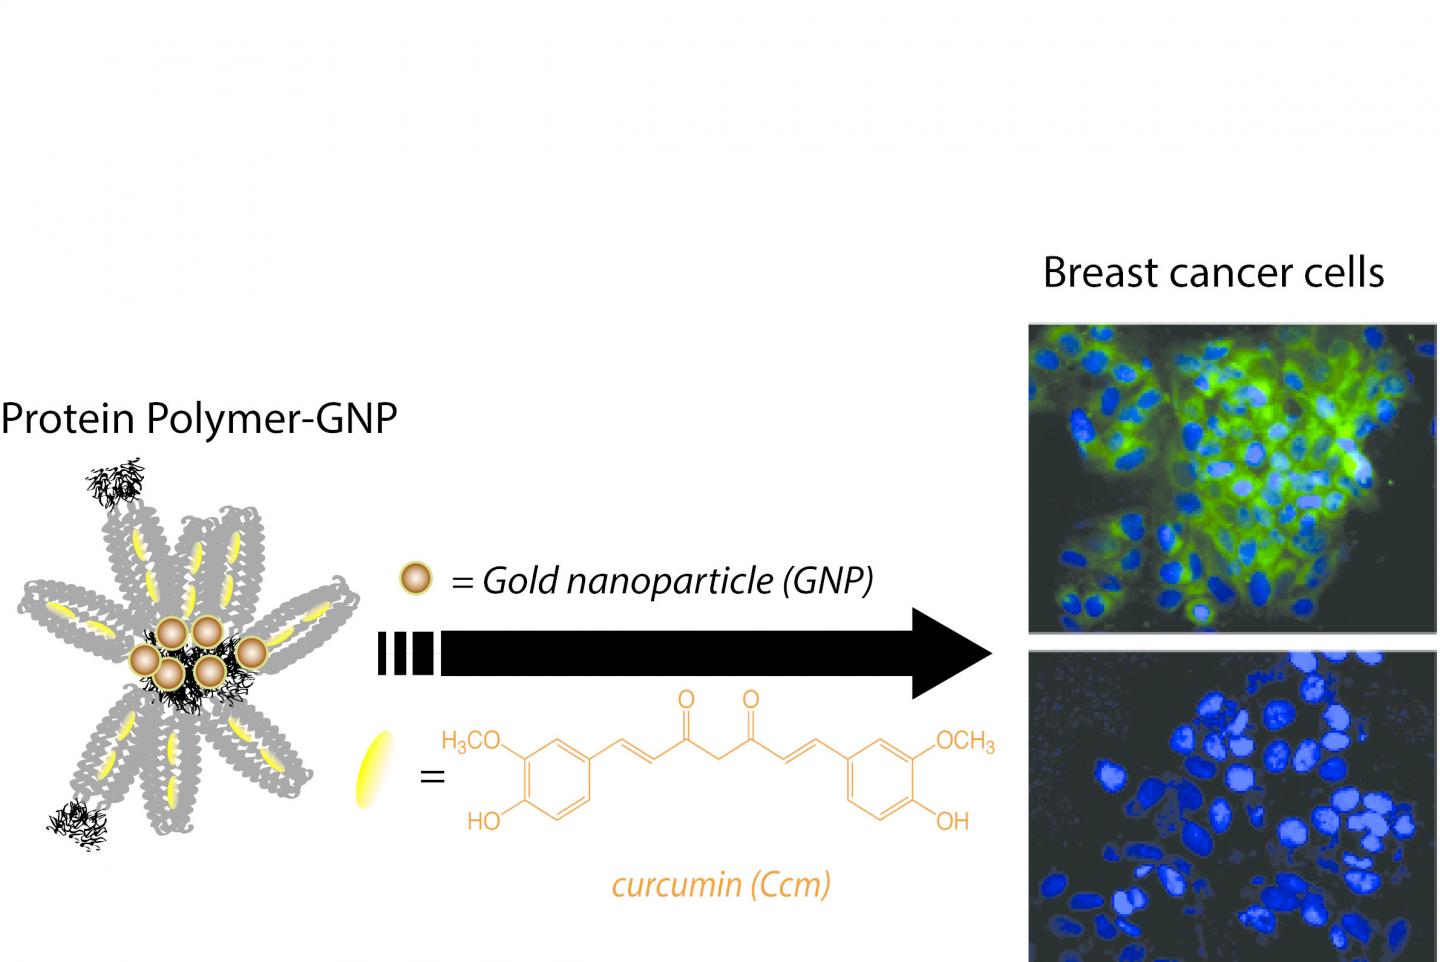 P-GNP Binding and Delivery of Curcumin to Cancer Cells